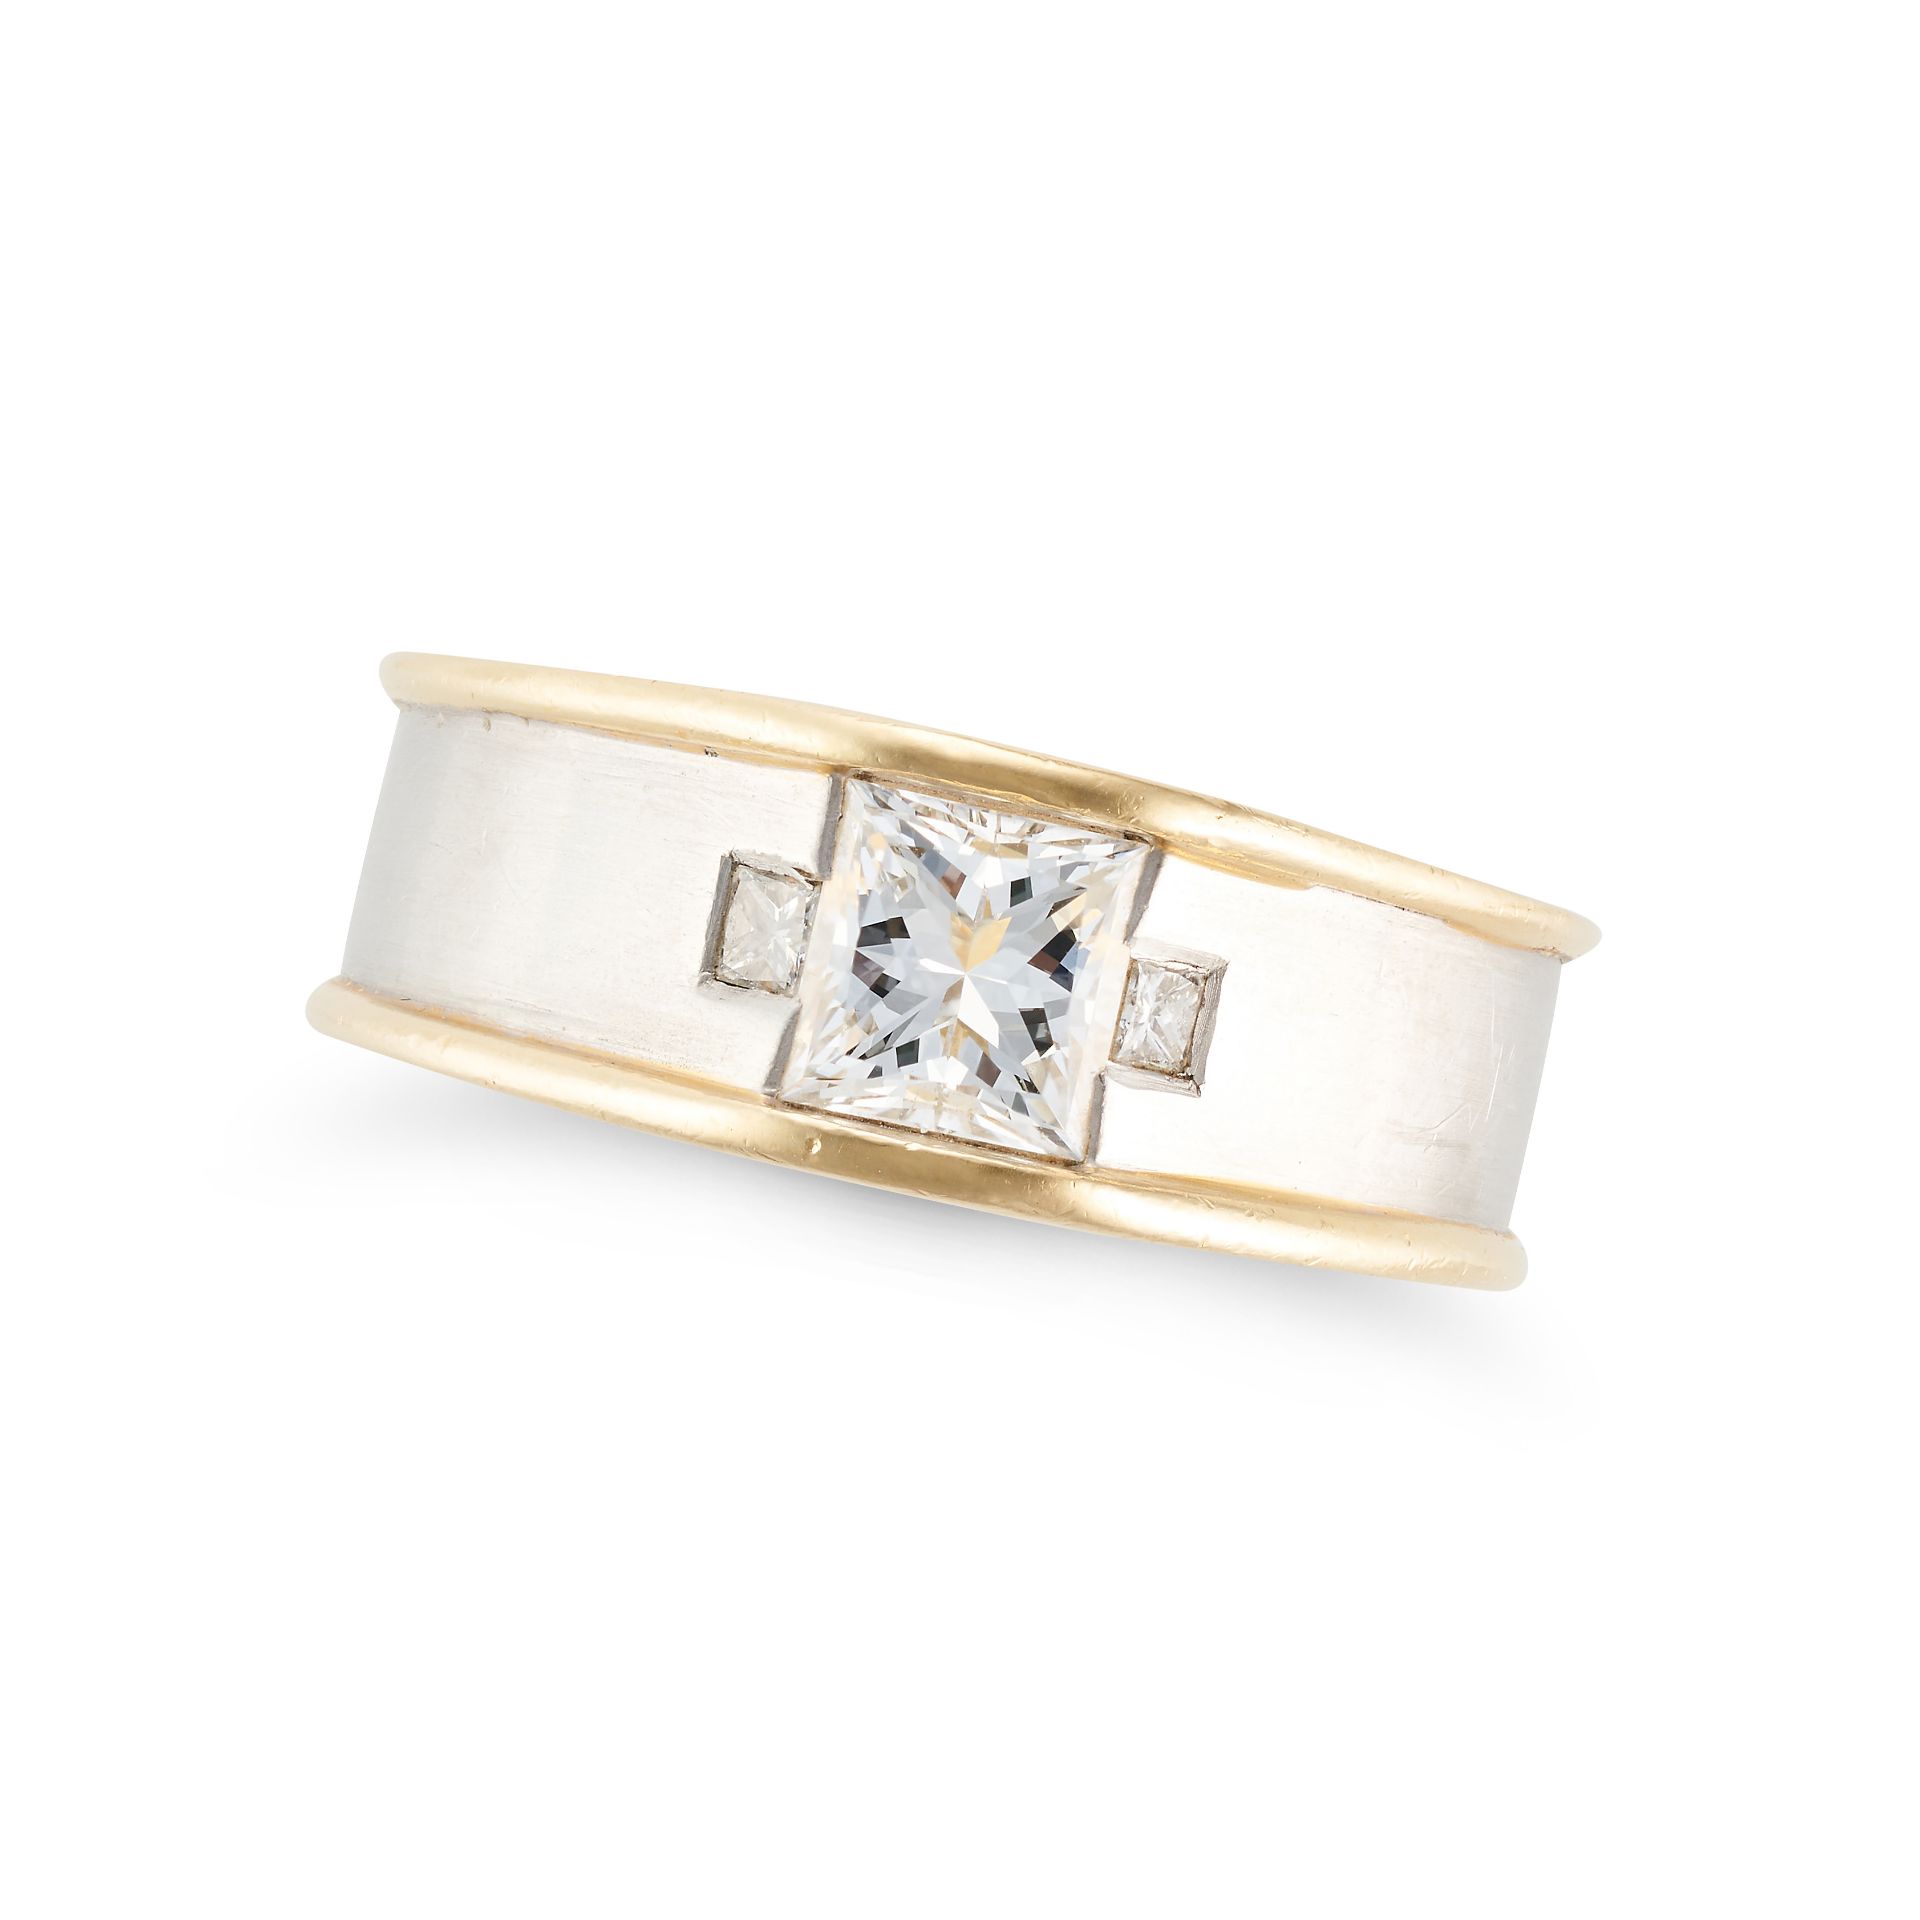 BOODLE & DUNTHORNE, A DIAMOND RING in 18ct white and yellow gold, set with a princess cut diamond...